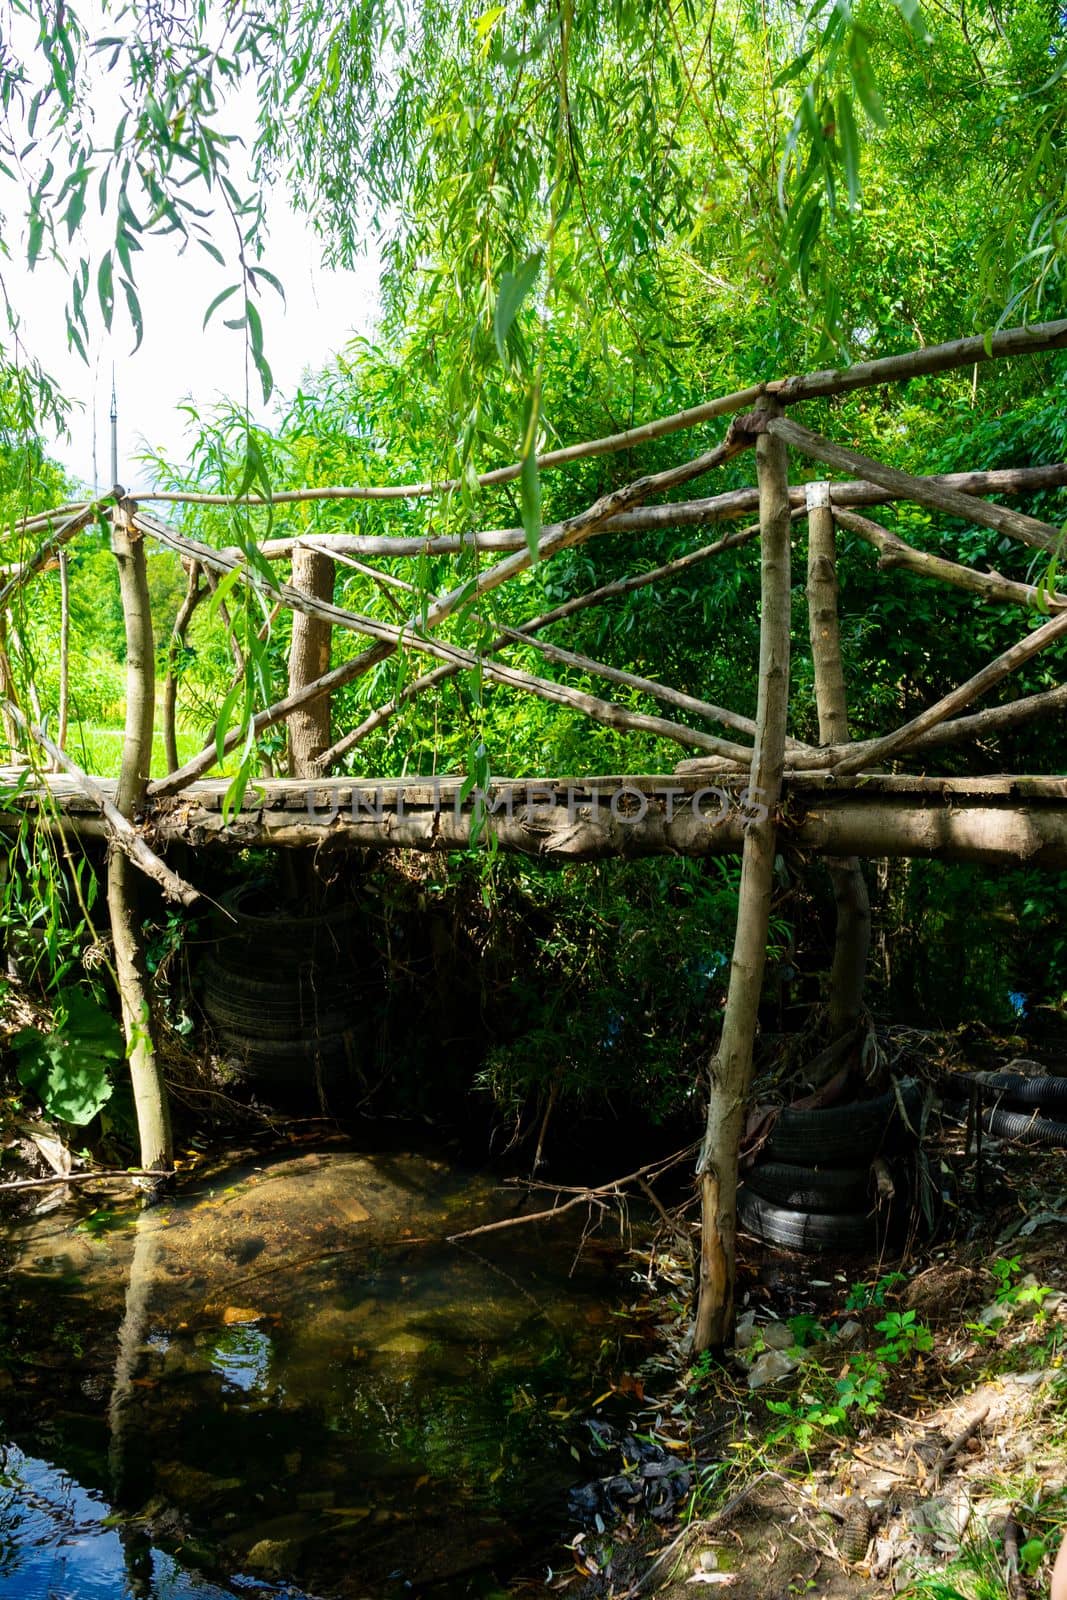 A wooden bridge over a small river under the canopy of green trees.